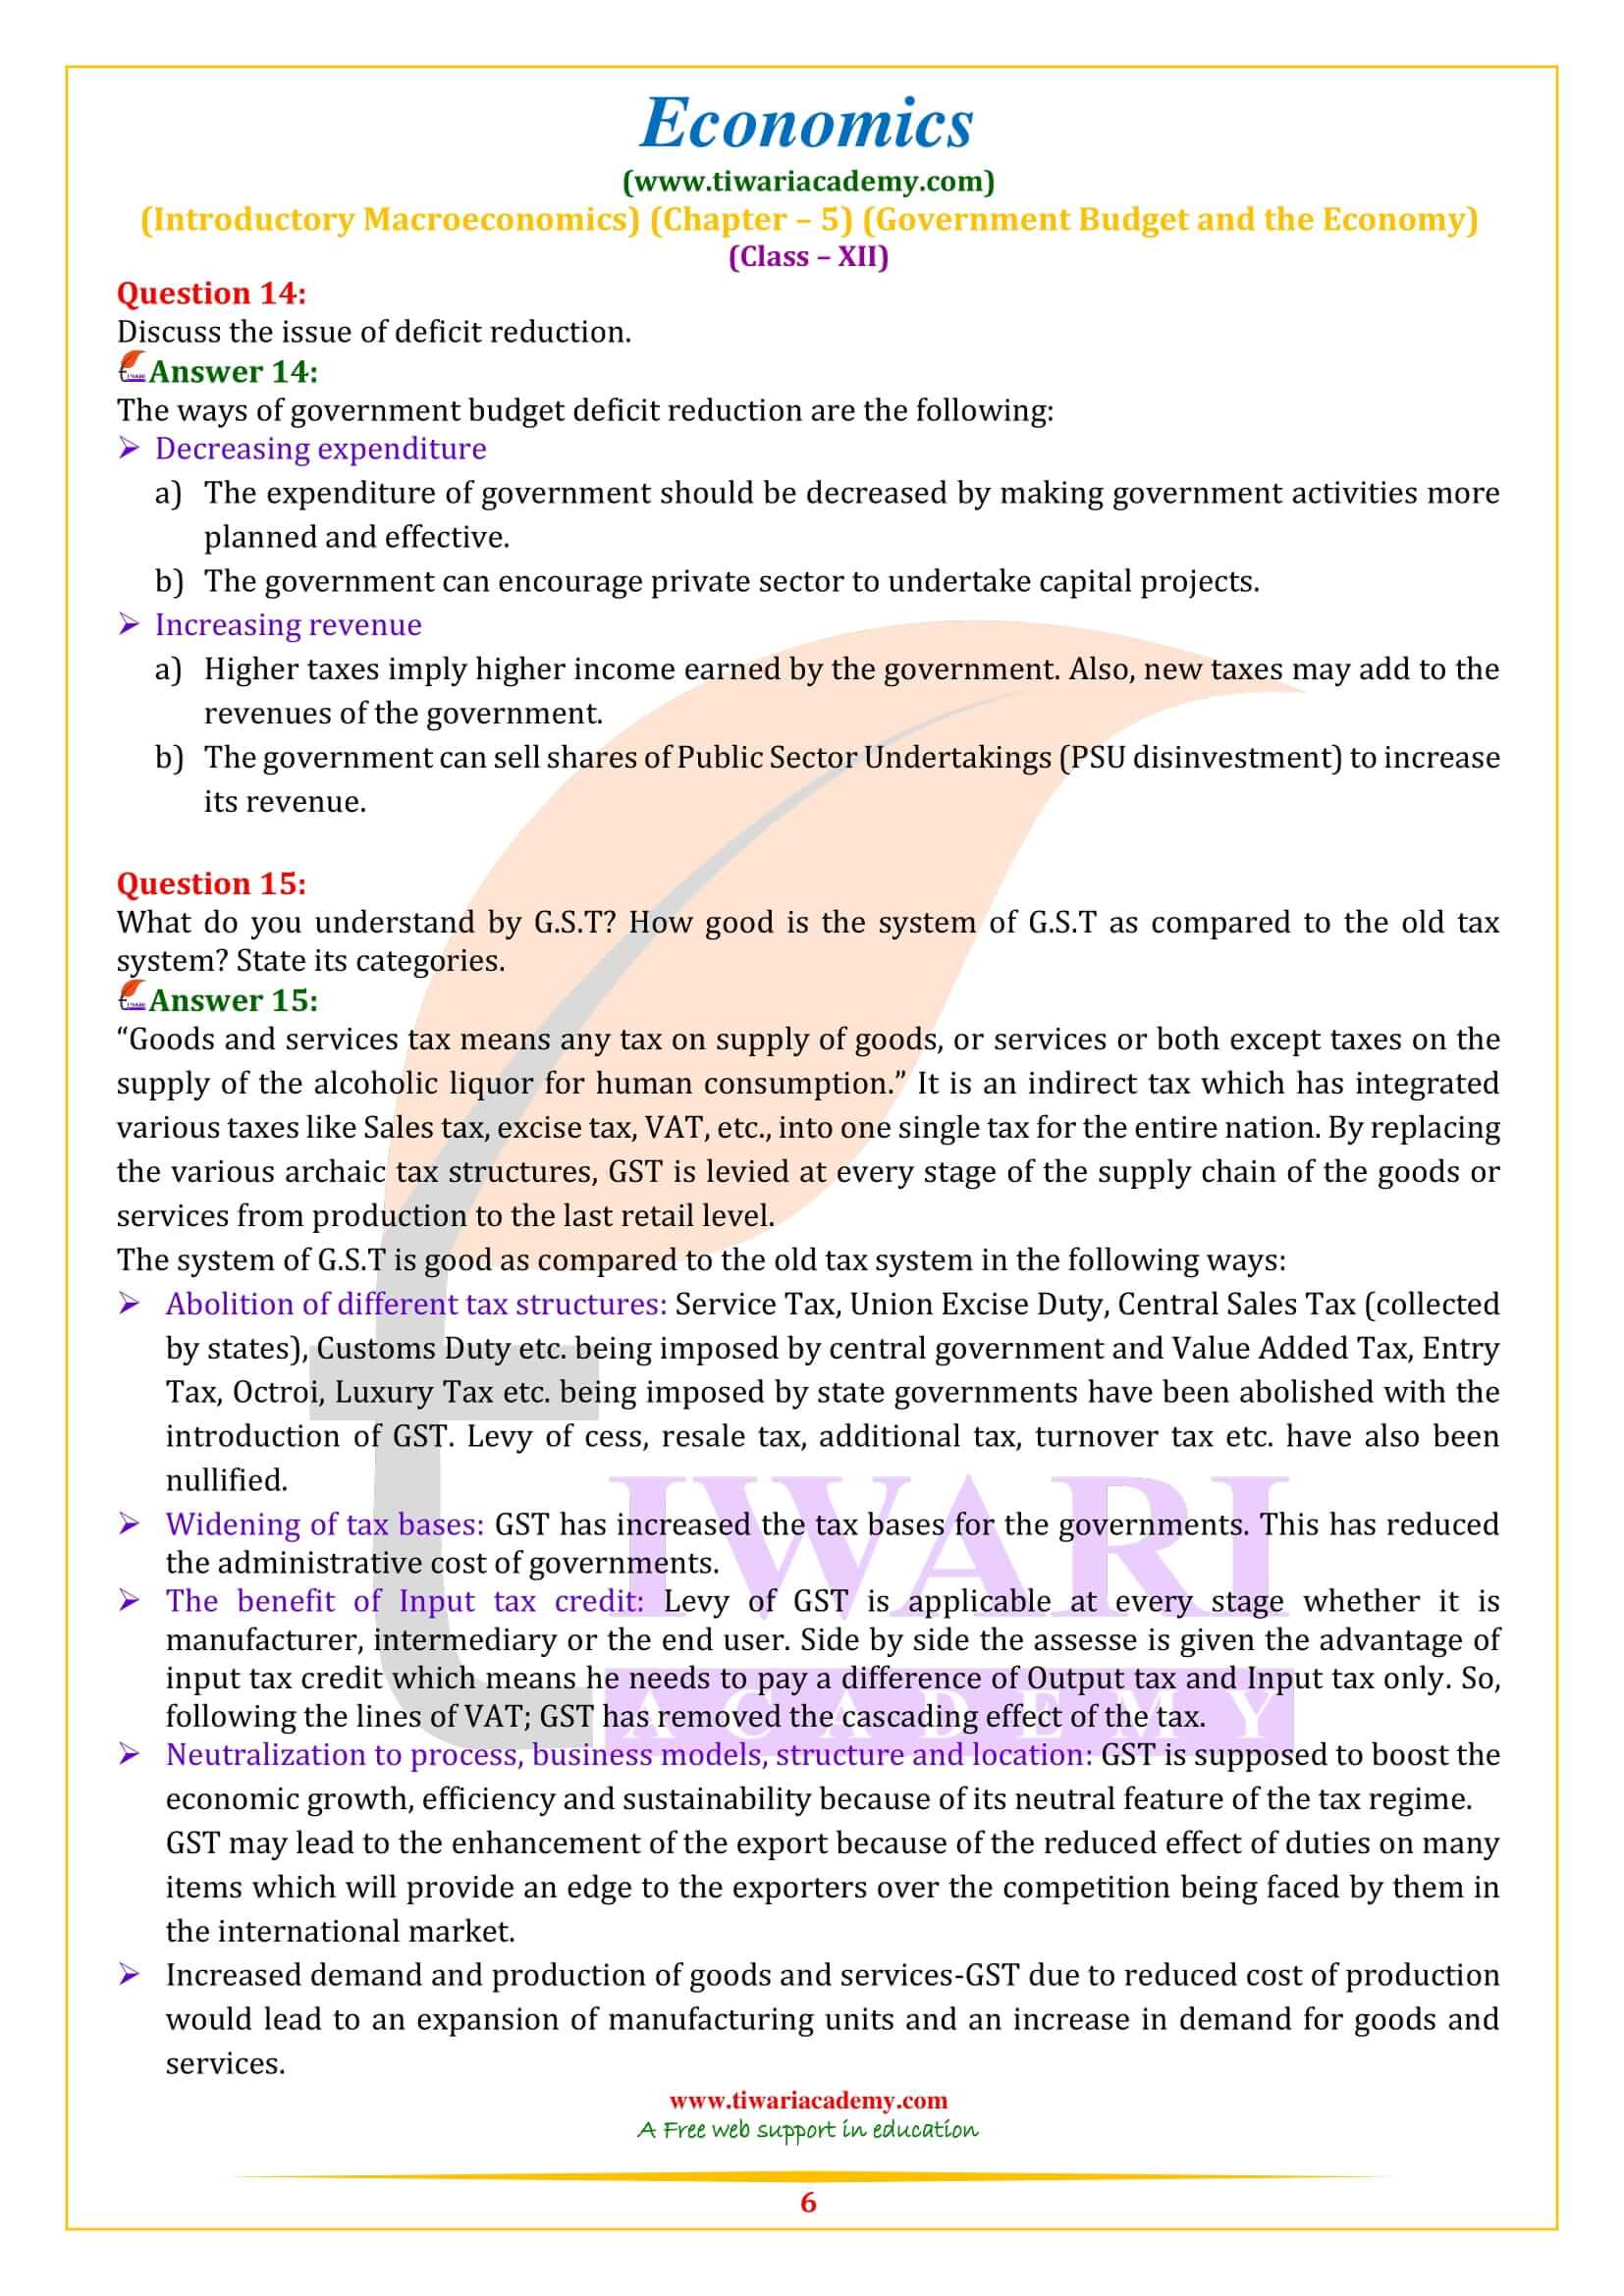 NCERT Solutions for Class 12 Economics Chapter 5 all questions